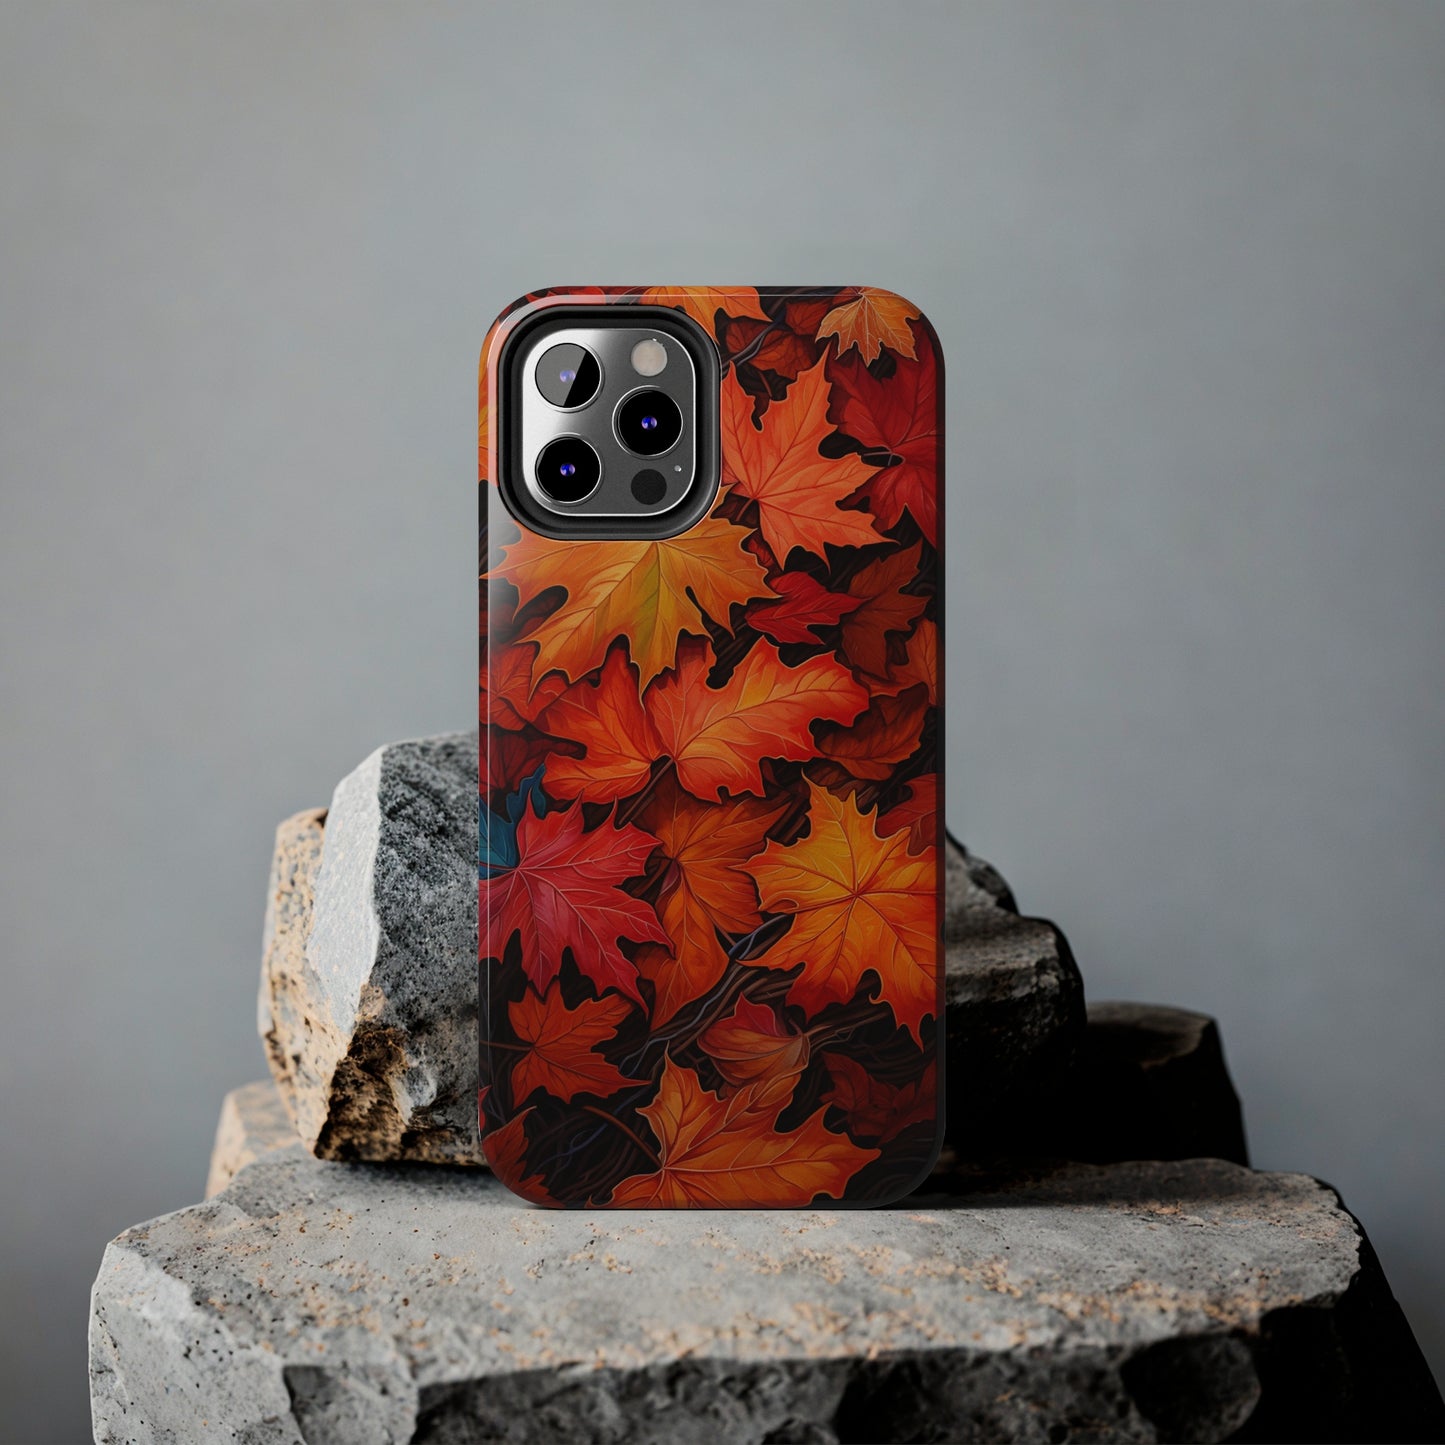 Autumn Aesthetic Fall Leaves | iPhone 14 13 12 11 Pro Max case iPhone XR XS Max Case iPhone X Case iPhone 7 Plus iPhone 8 Plus case iPhone 6 case